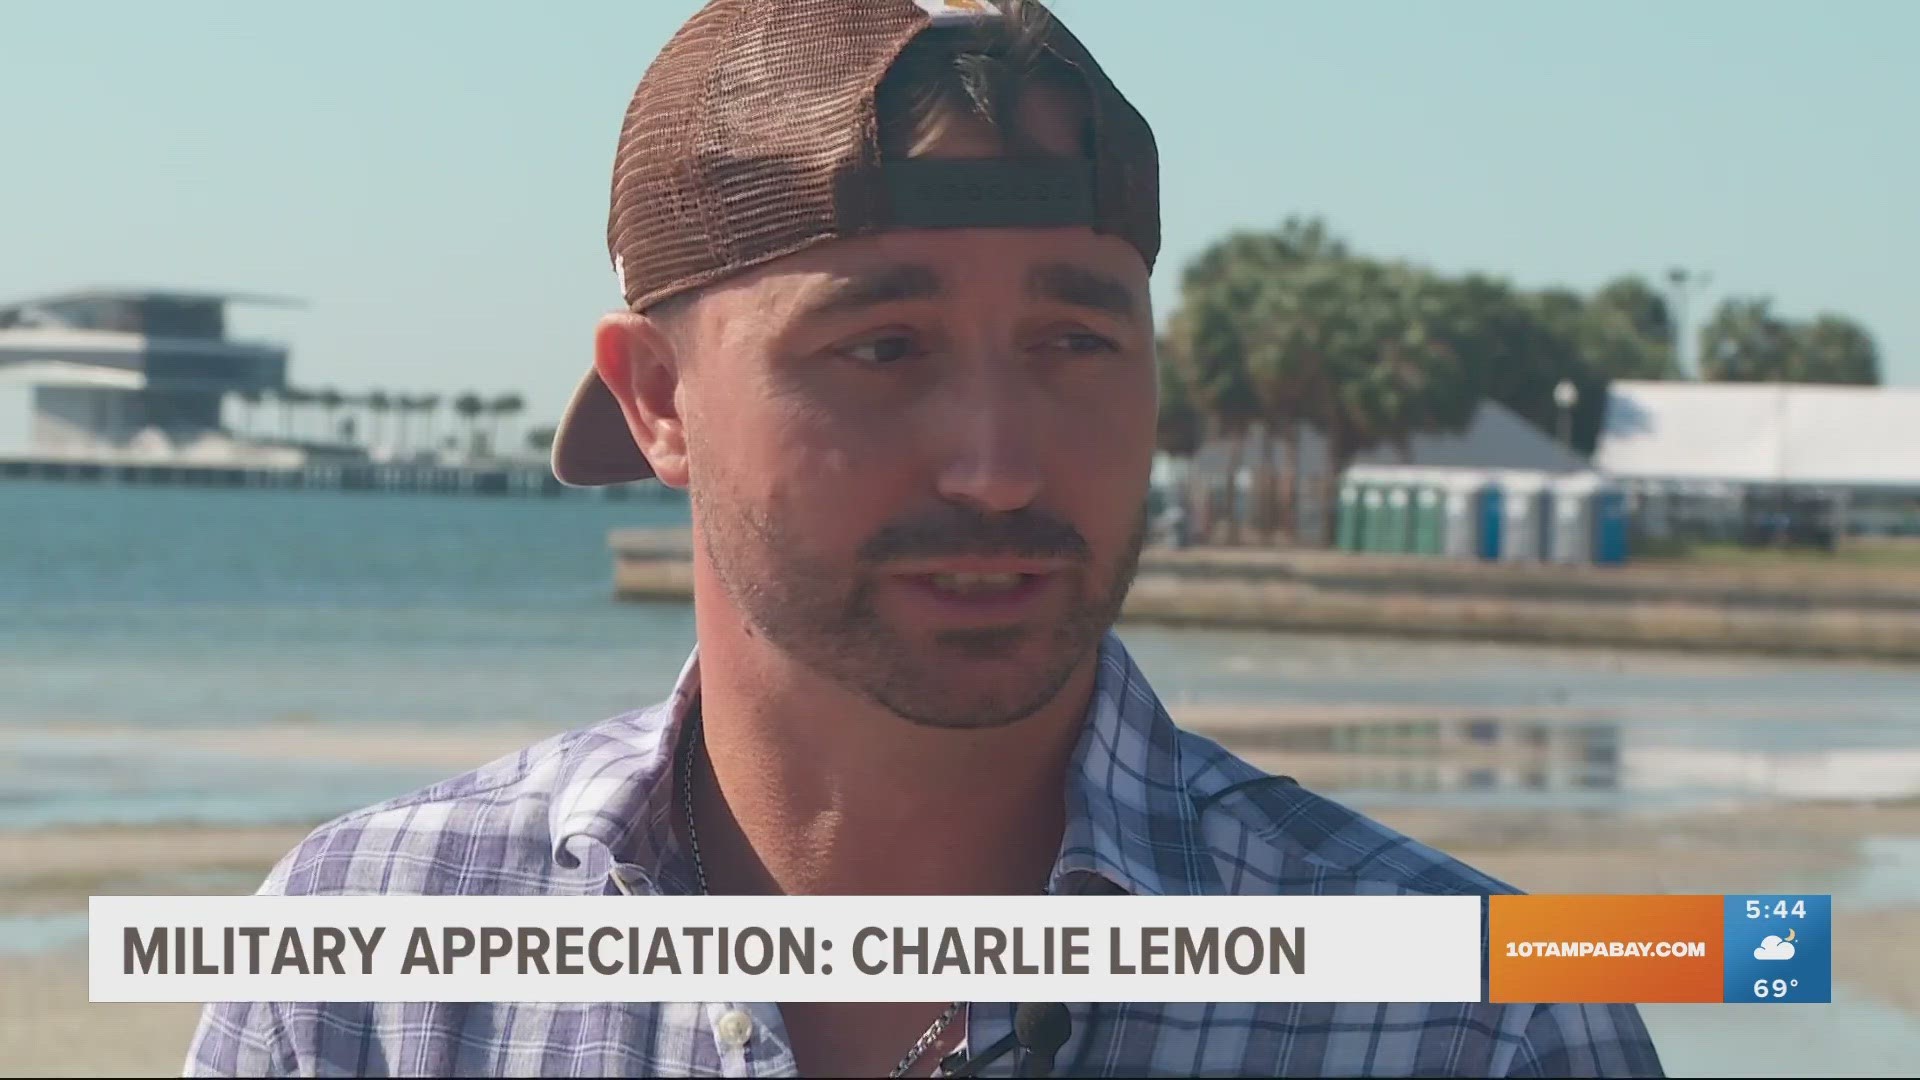 "Just live a life worthy of our sacrifice. That's what I do every day," Charlie Lemon said.